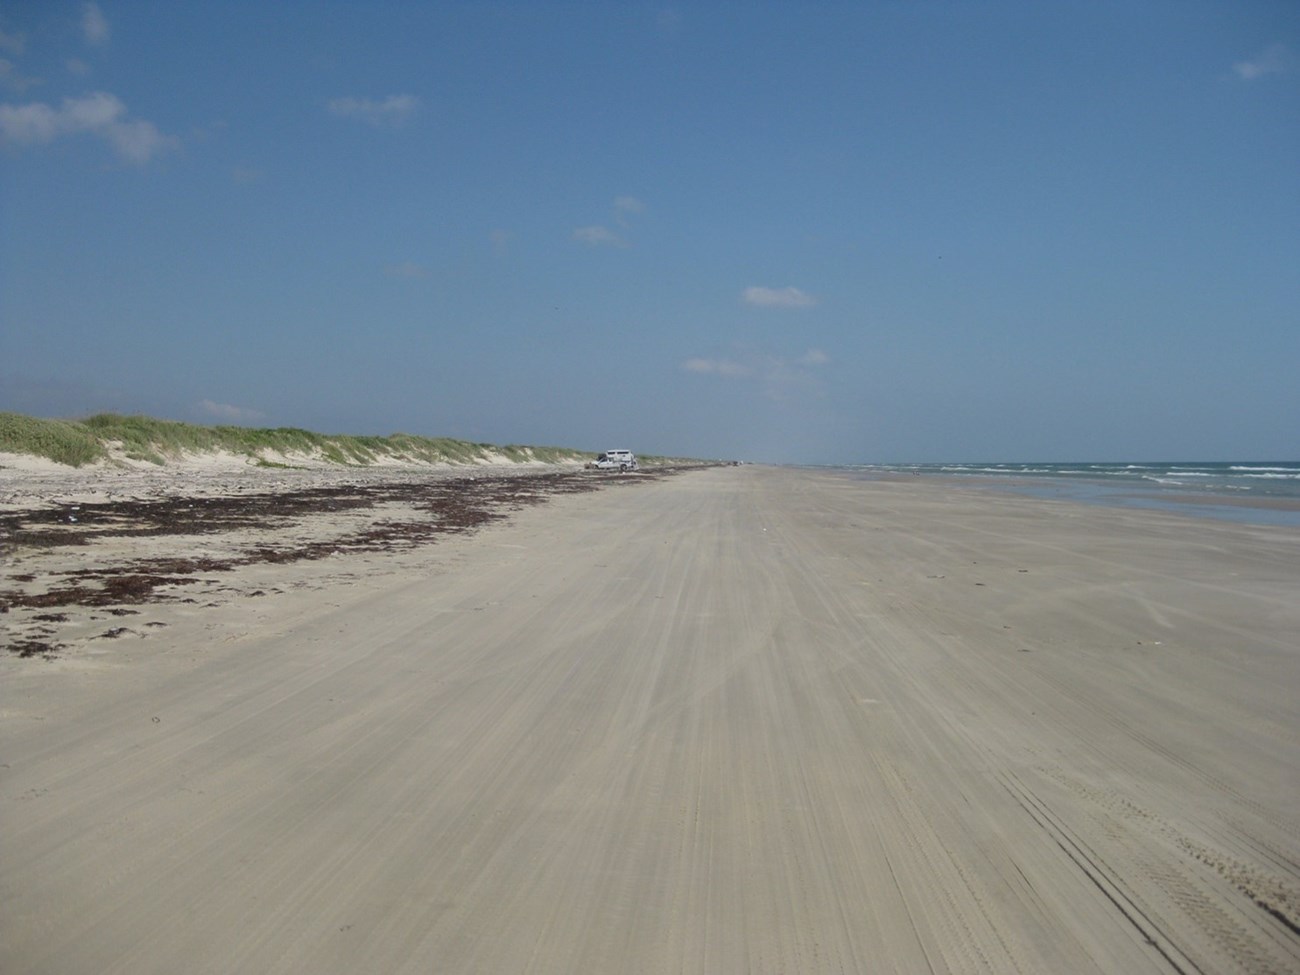 A long sandy beach with dunes on the left side and water on the right.